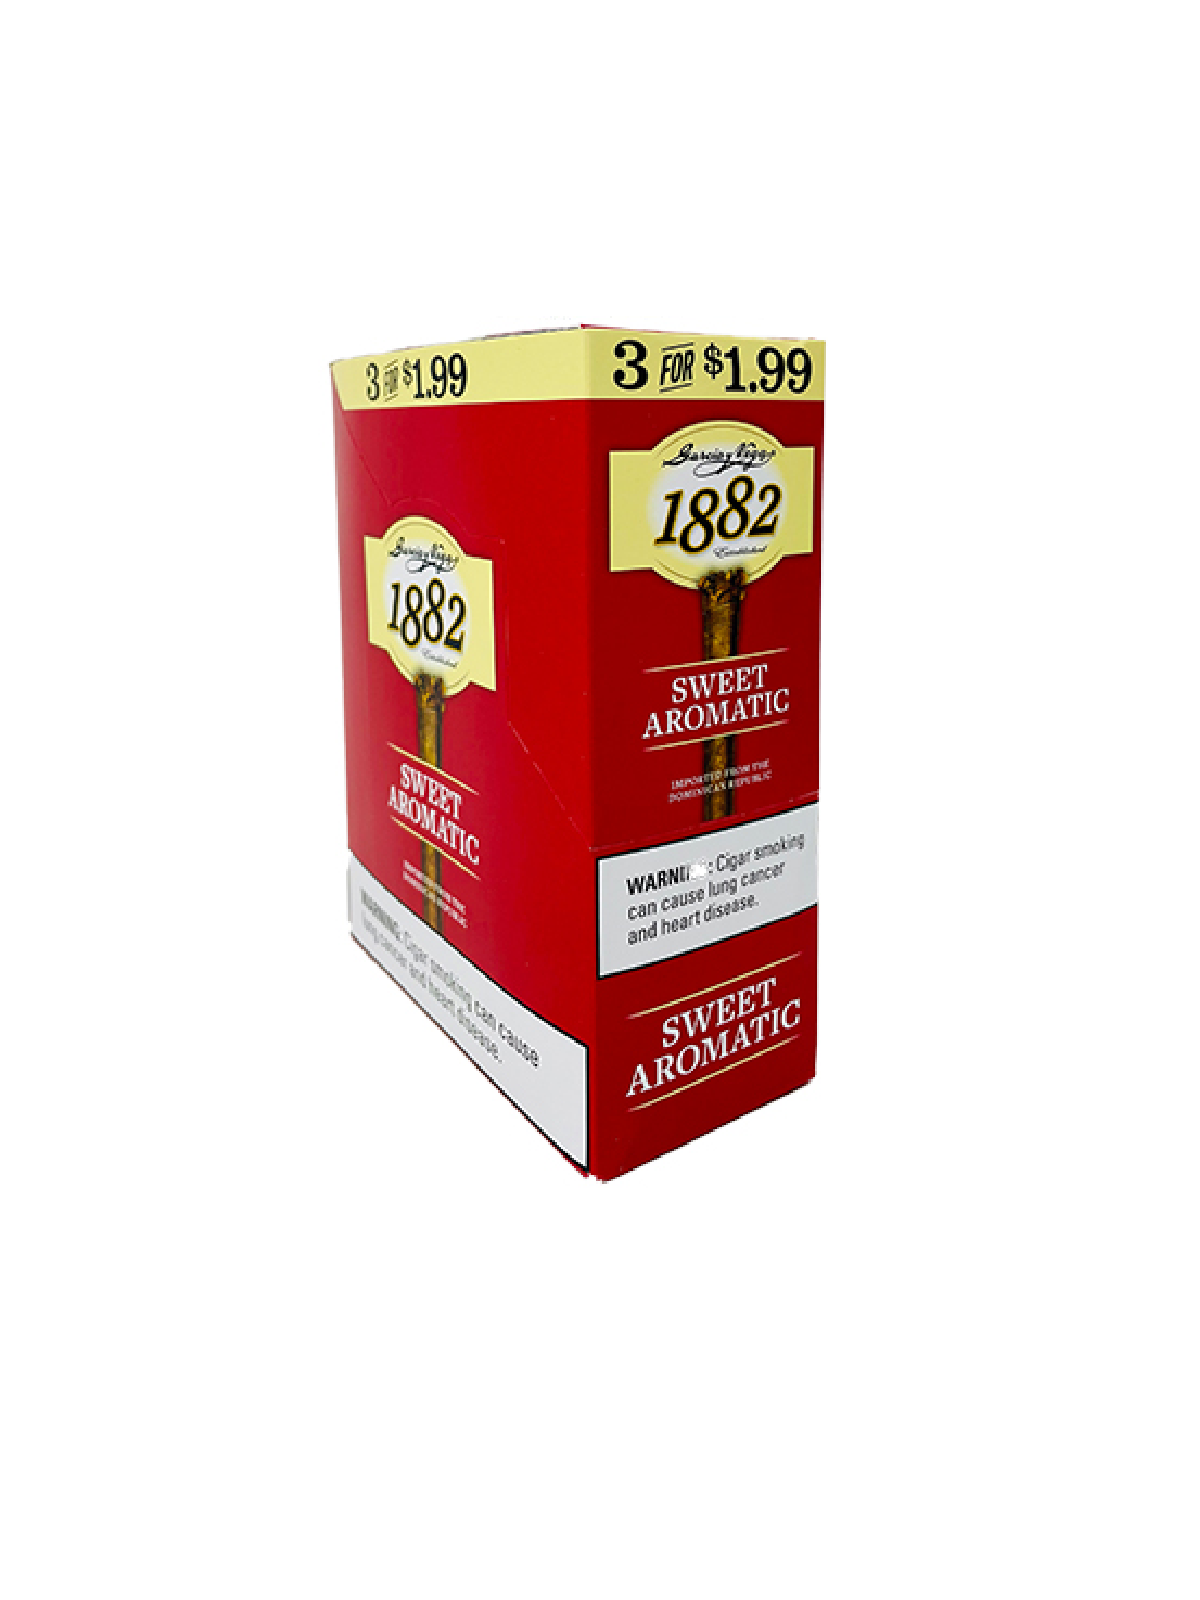 1882 SWEET AROMATIC 3 FOR $1.99 10/3 PK 30 CT